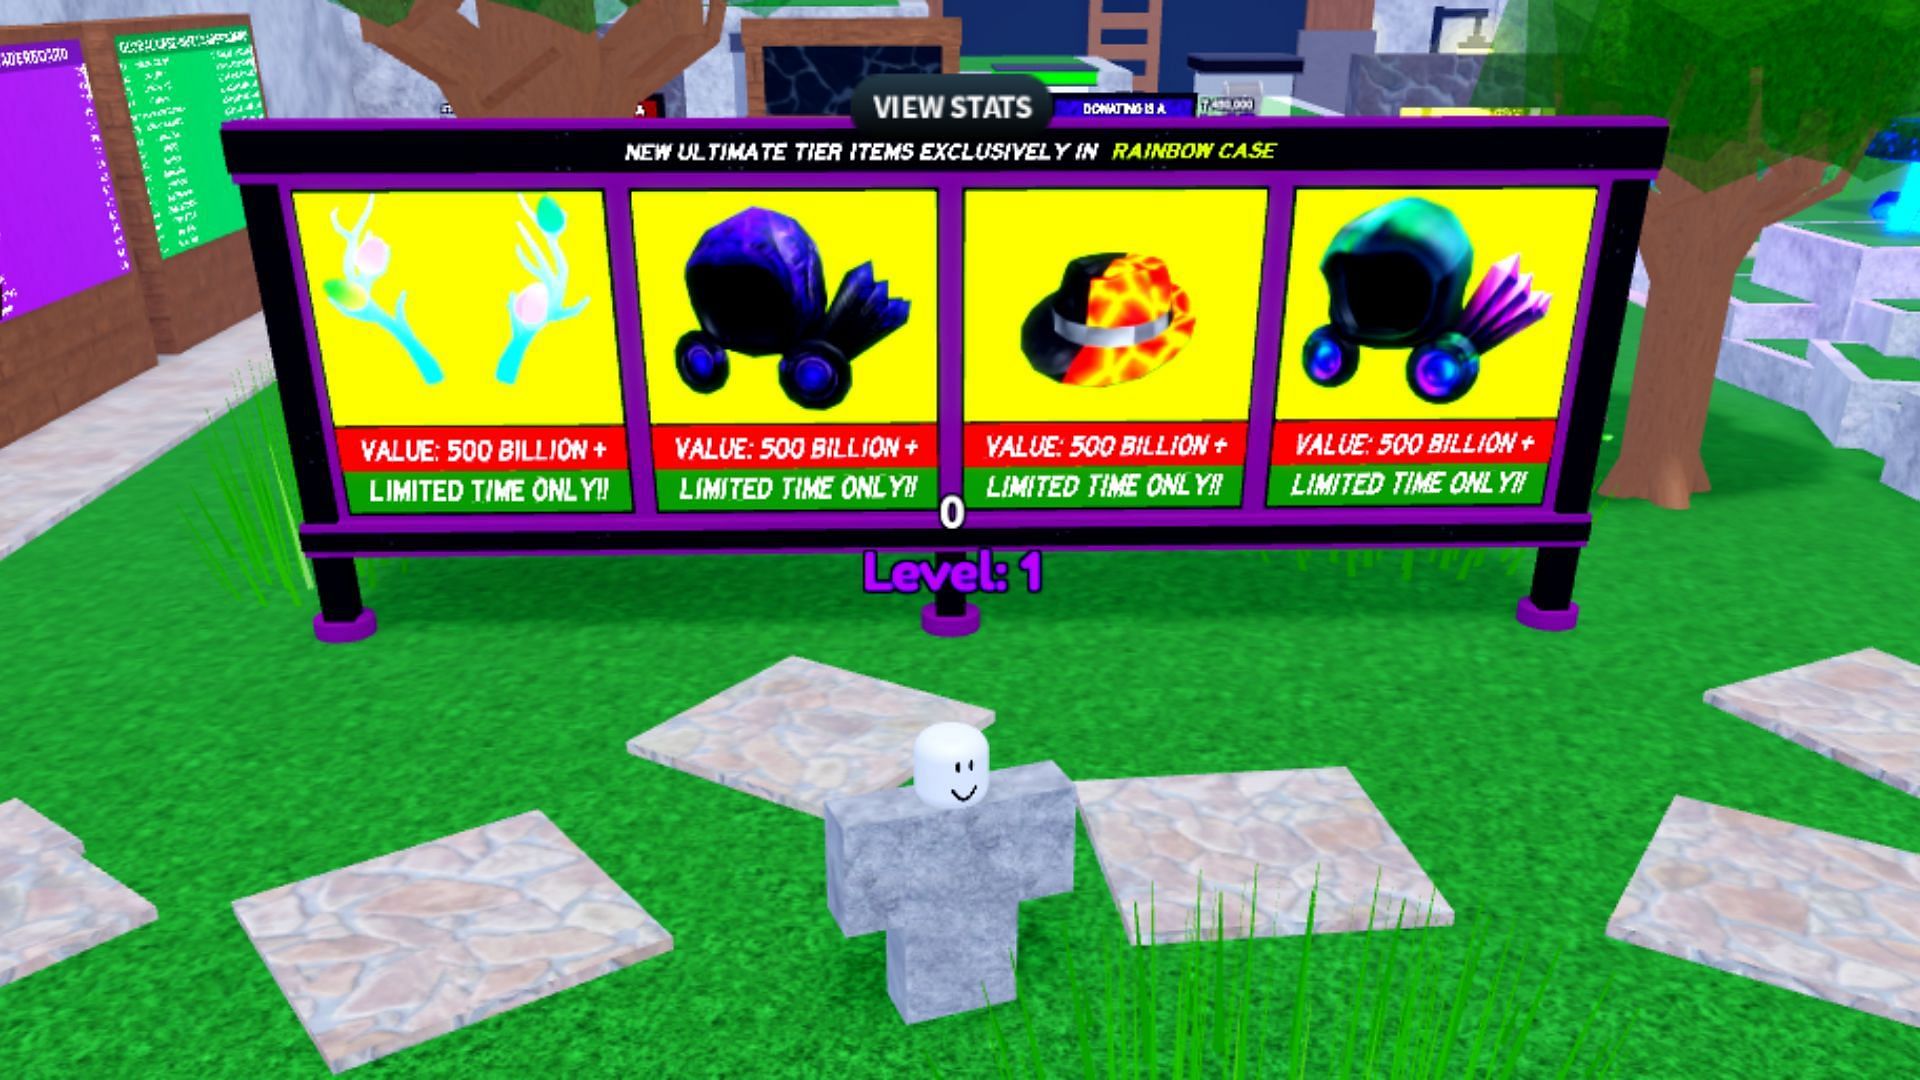 Exclusive items available in Trade Clicker (Image via Roblox)